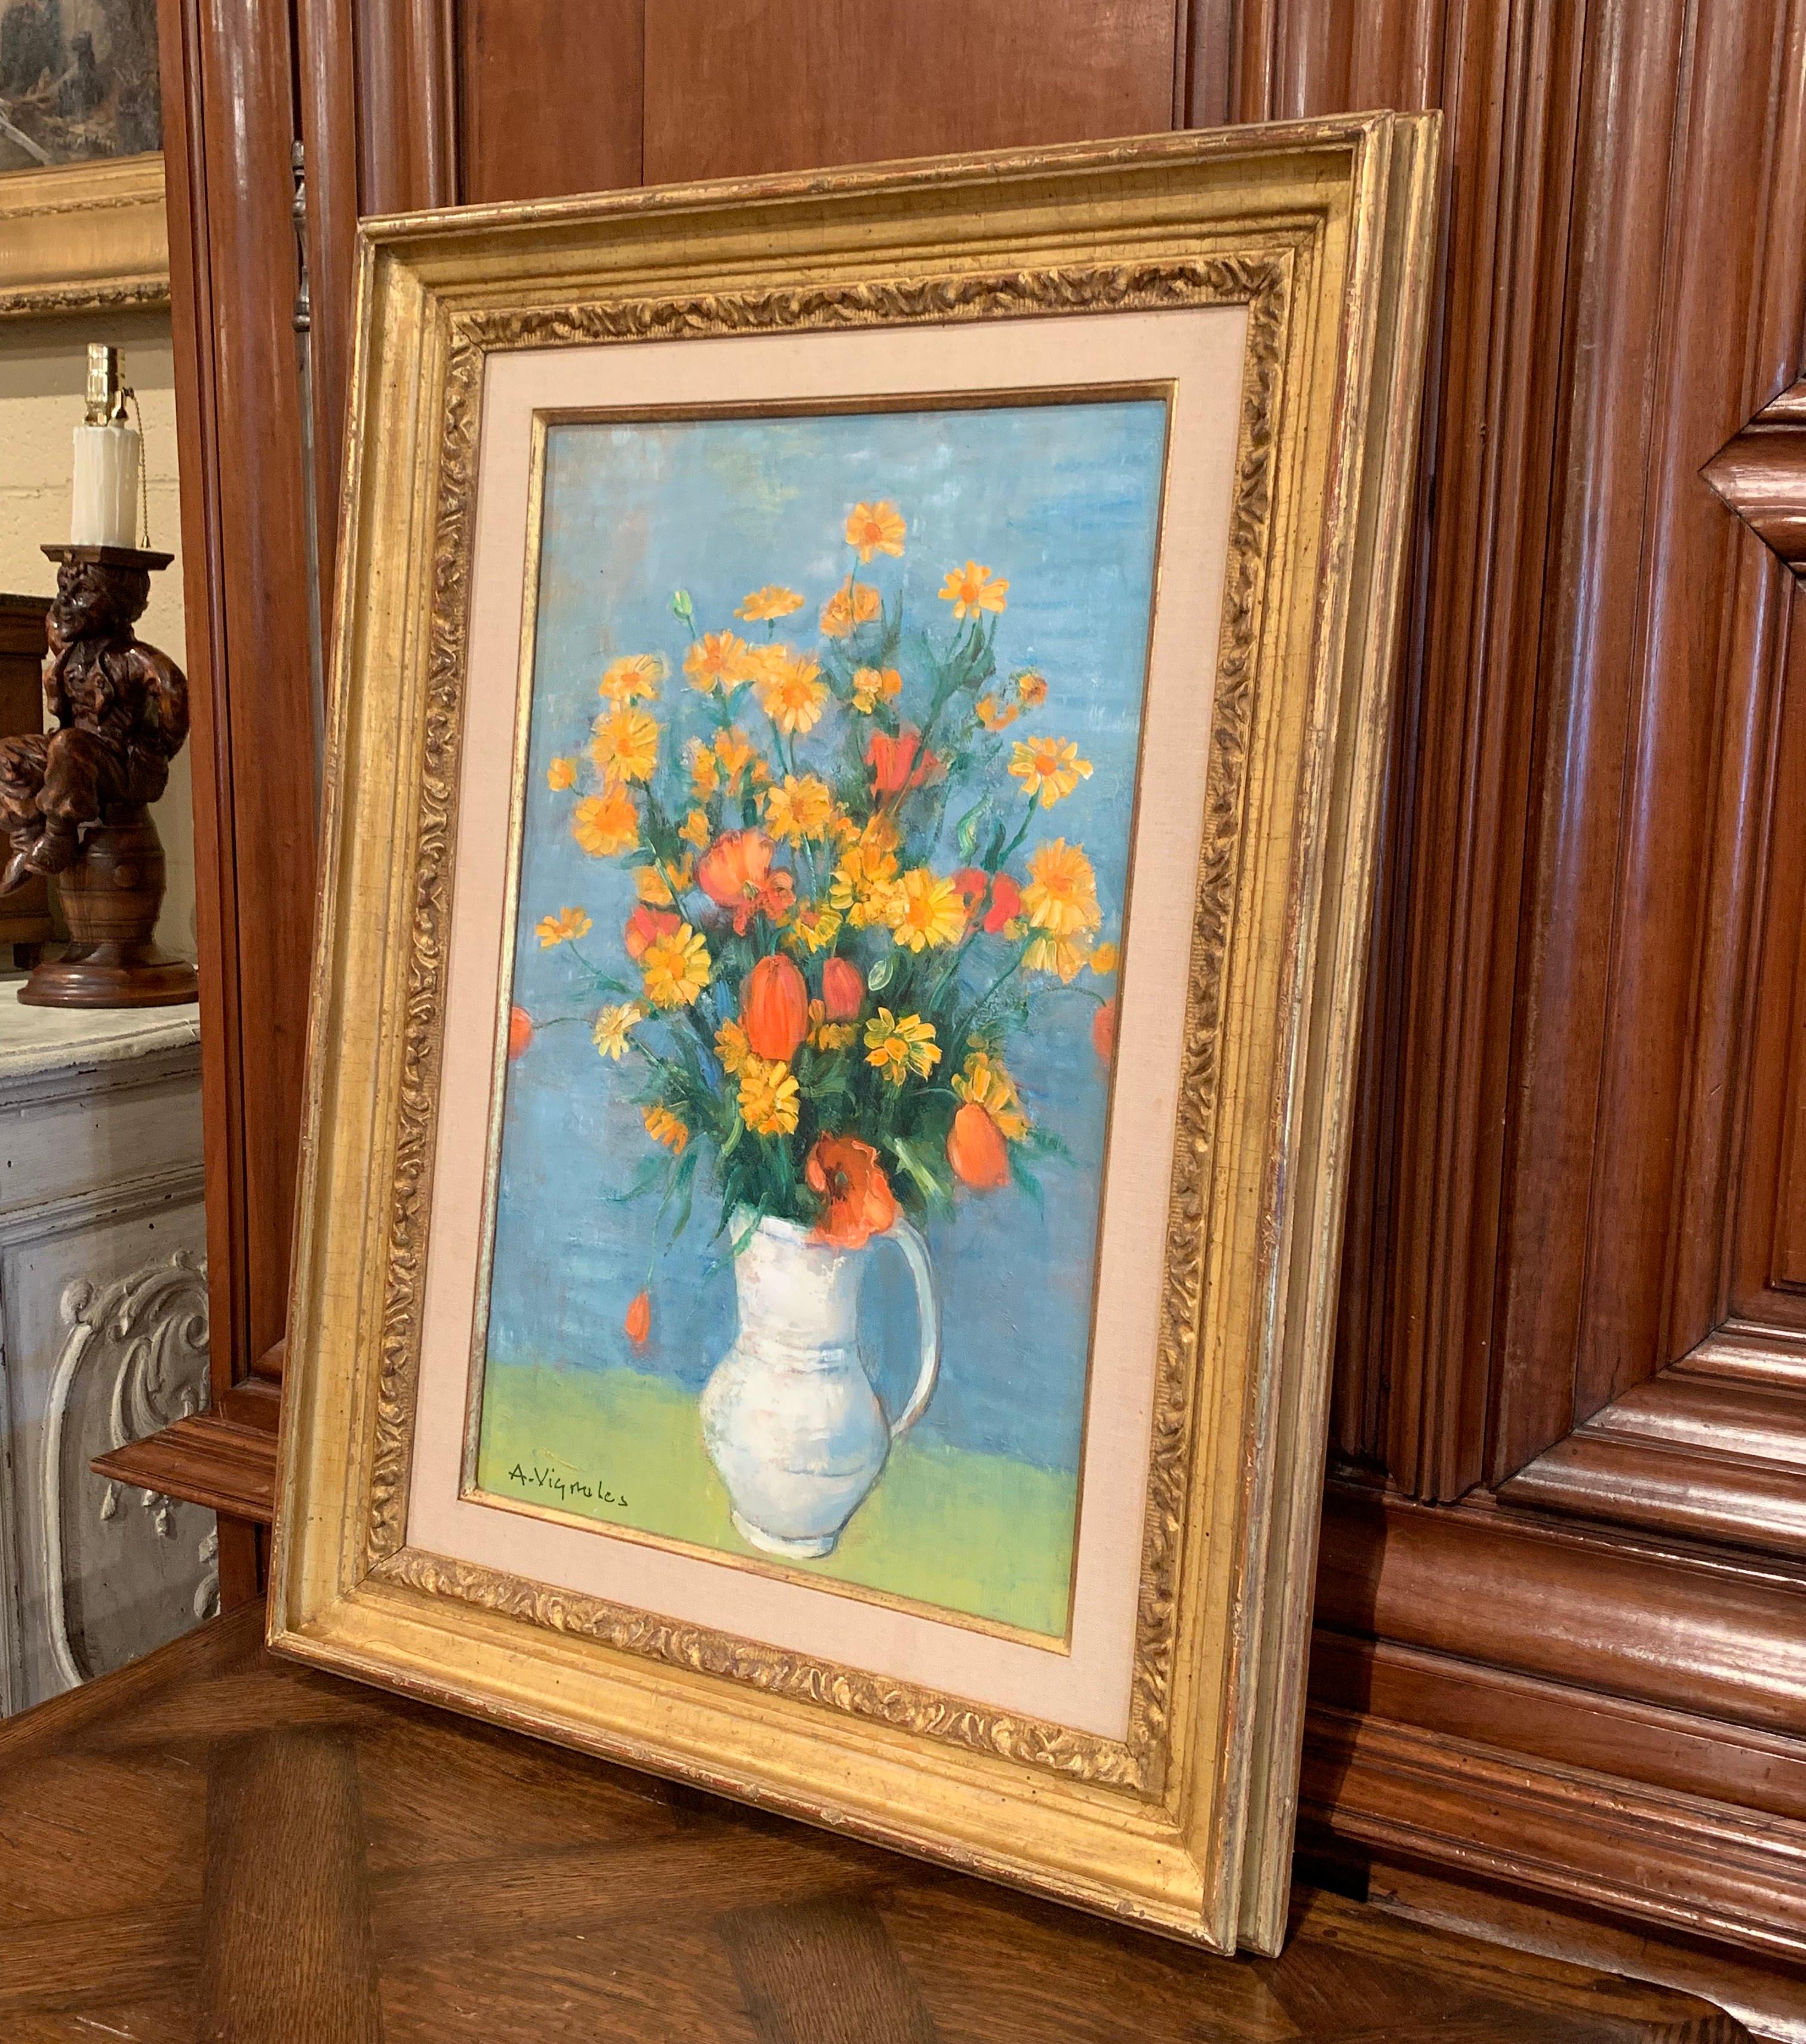 Midcentury French Still Life Oil Painting in Gilt Frame Signed A. Vignoles 3